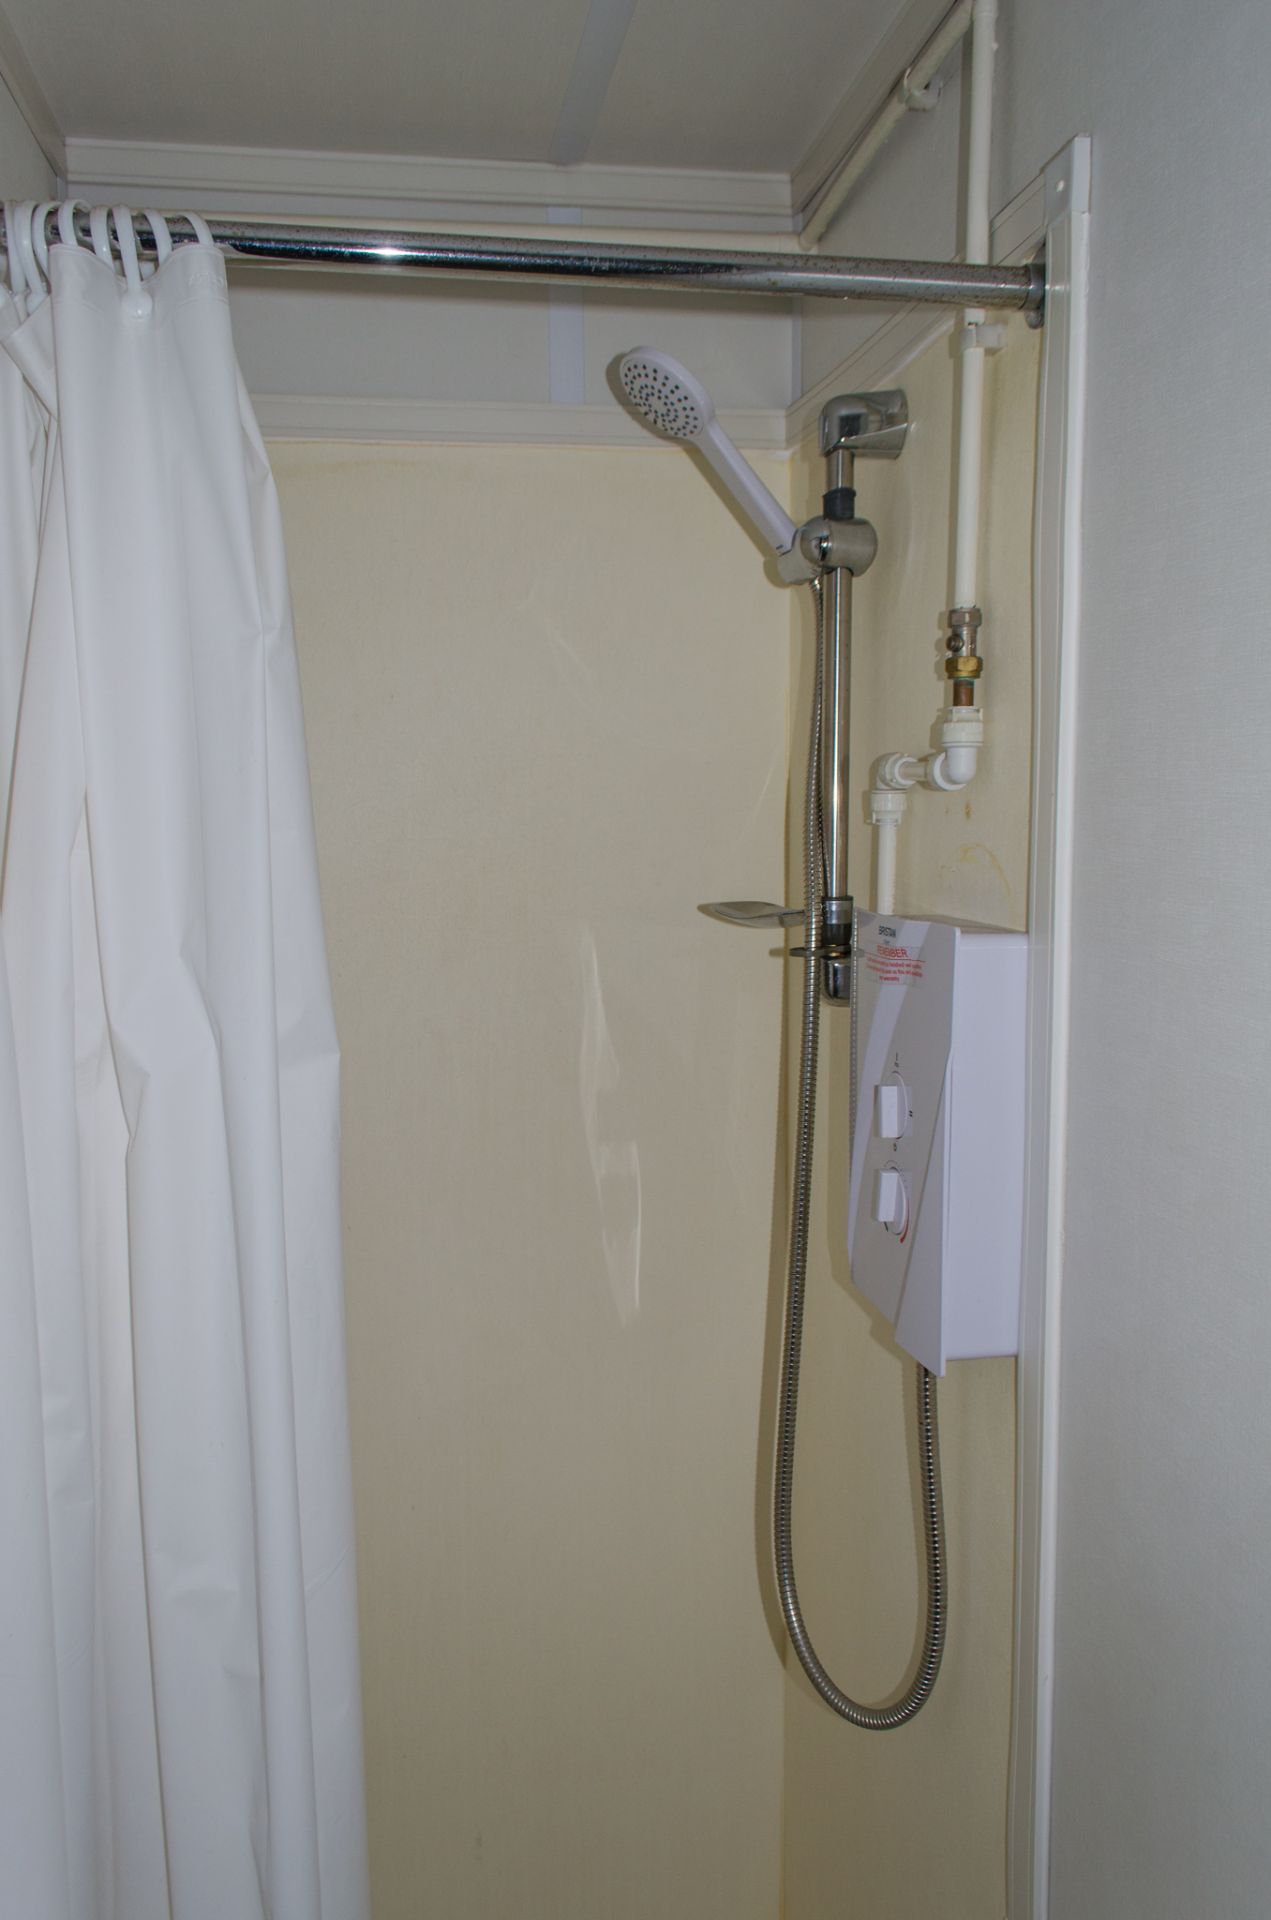 32 ft x 10 ft steel jack leg shower site unit Comprising of 8 - showers & changing area BBA1684 - Image 10 of 14